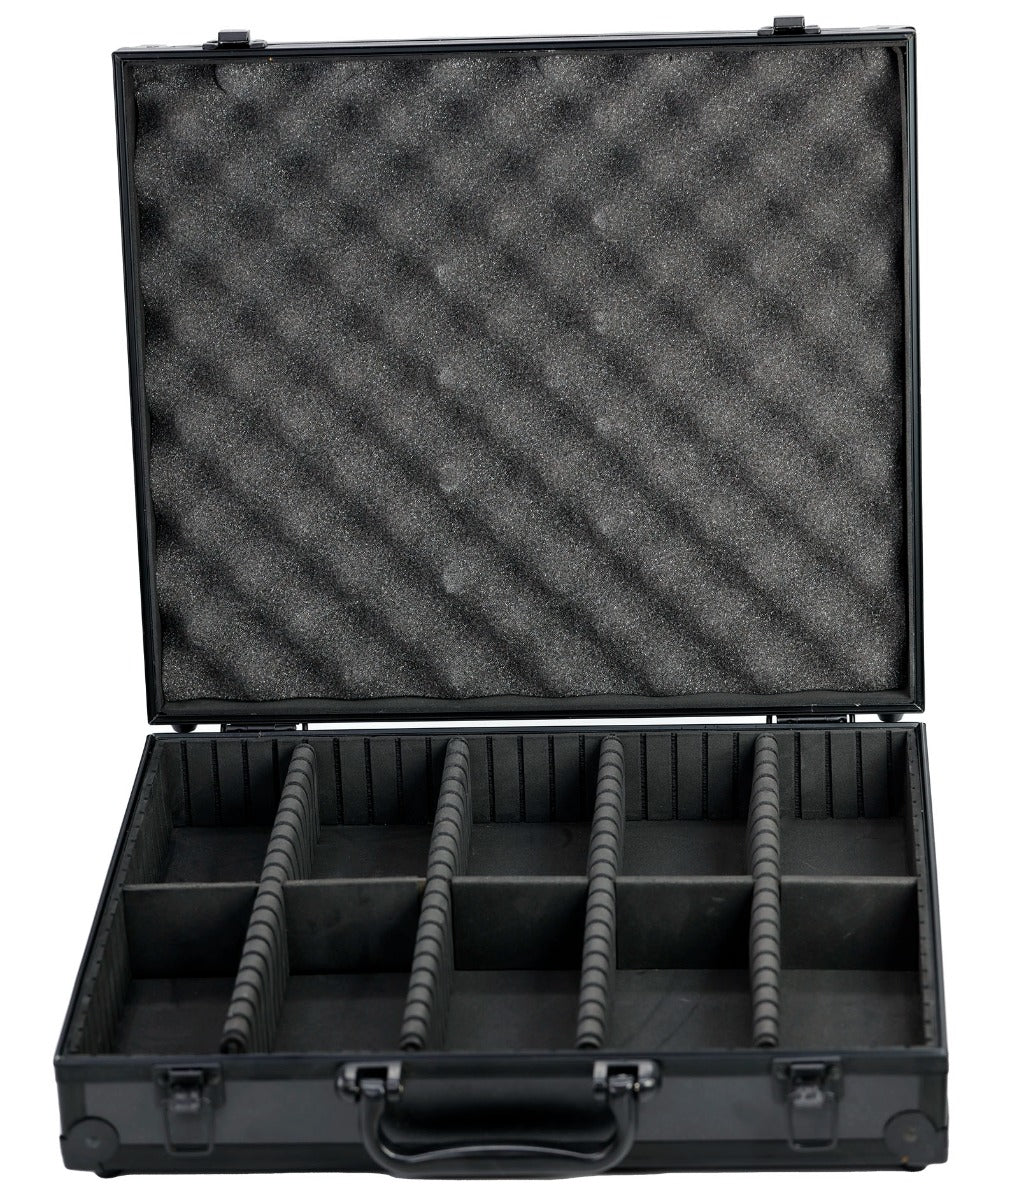 1/32 Slot Car Aluminum Carrying Case For Scalextric Carrera Slot.it NSR Storage - PowerHobby